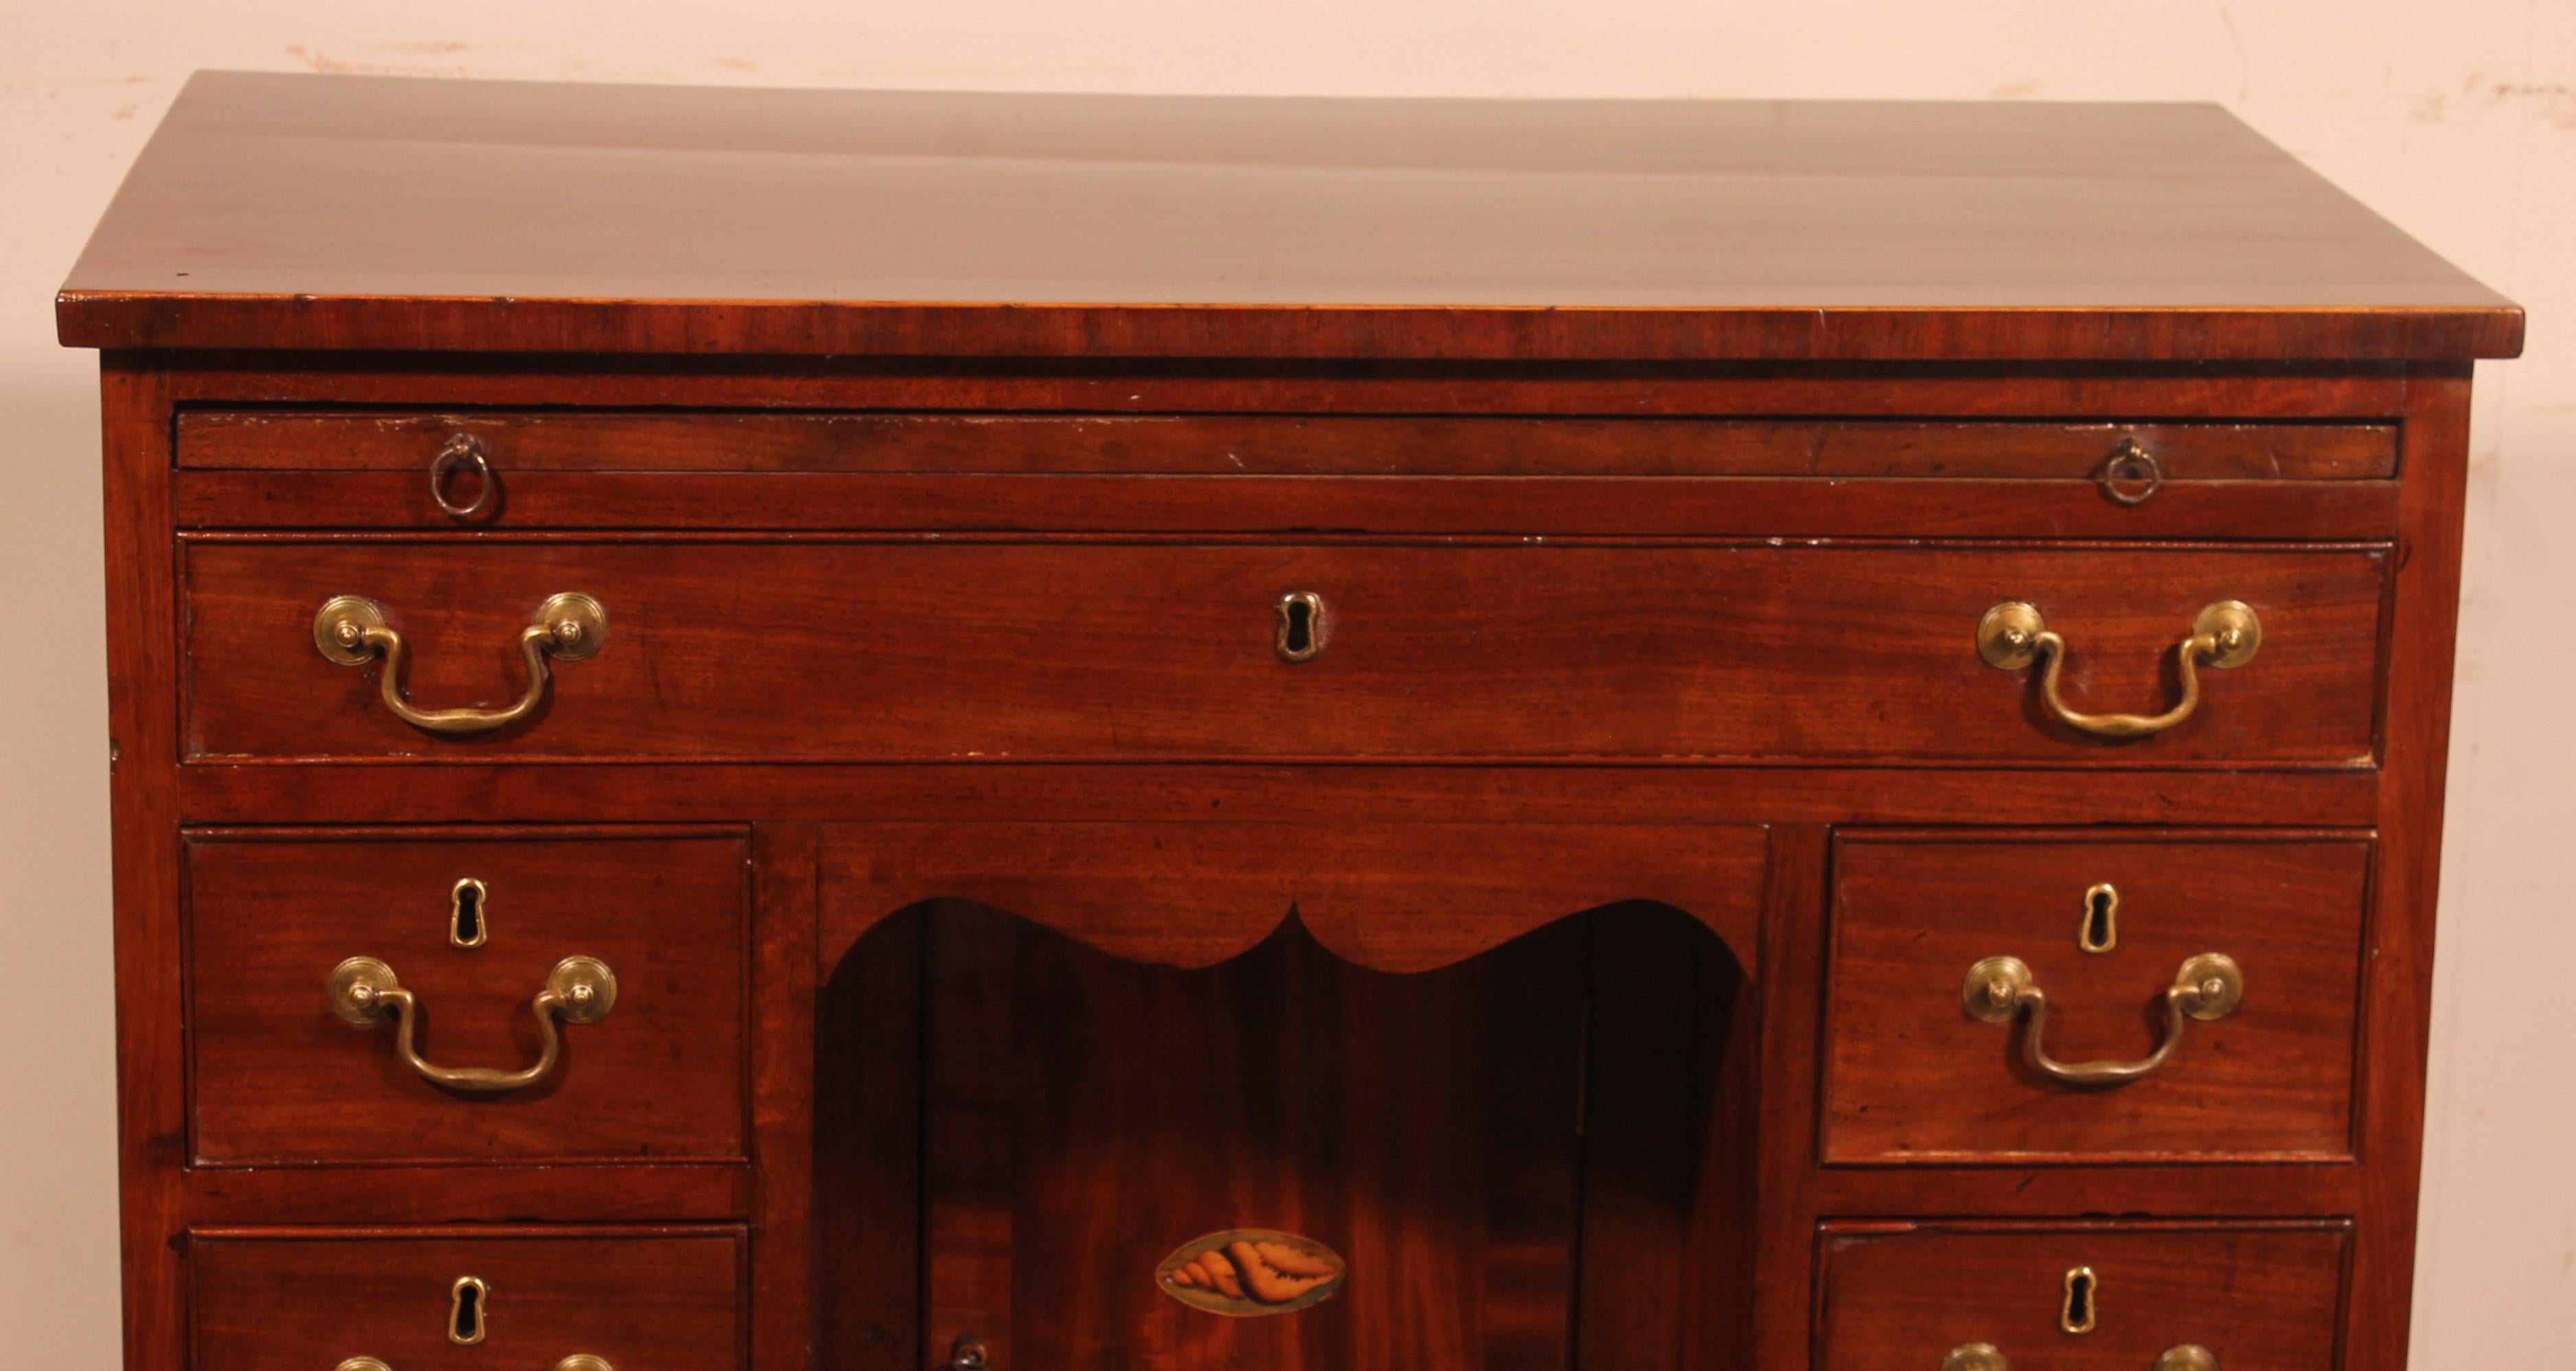 Superb small chest of drawers/writing desk/secretaire in mahogany from the 18th century called Kneehole desk from the George III period

Indeed, these small pieces of furniture are called Knee Hole desks since they have a small door in the center